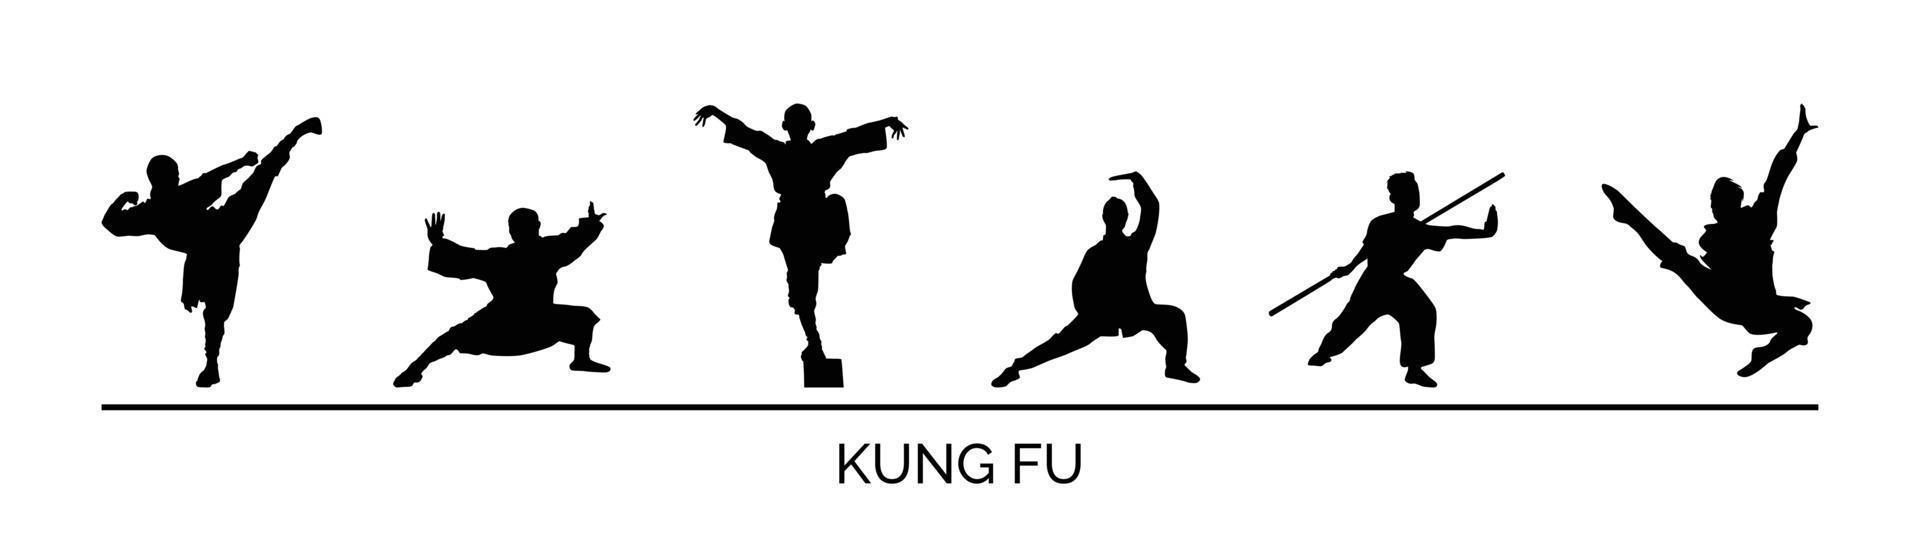 Martial Arts Kung Fu silhouette bundle. Different style of Kung Fu vector